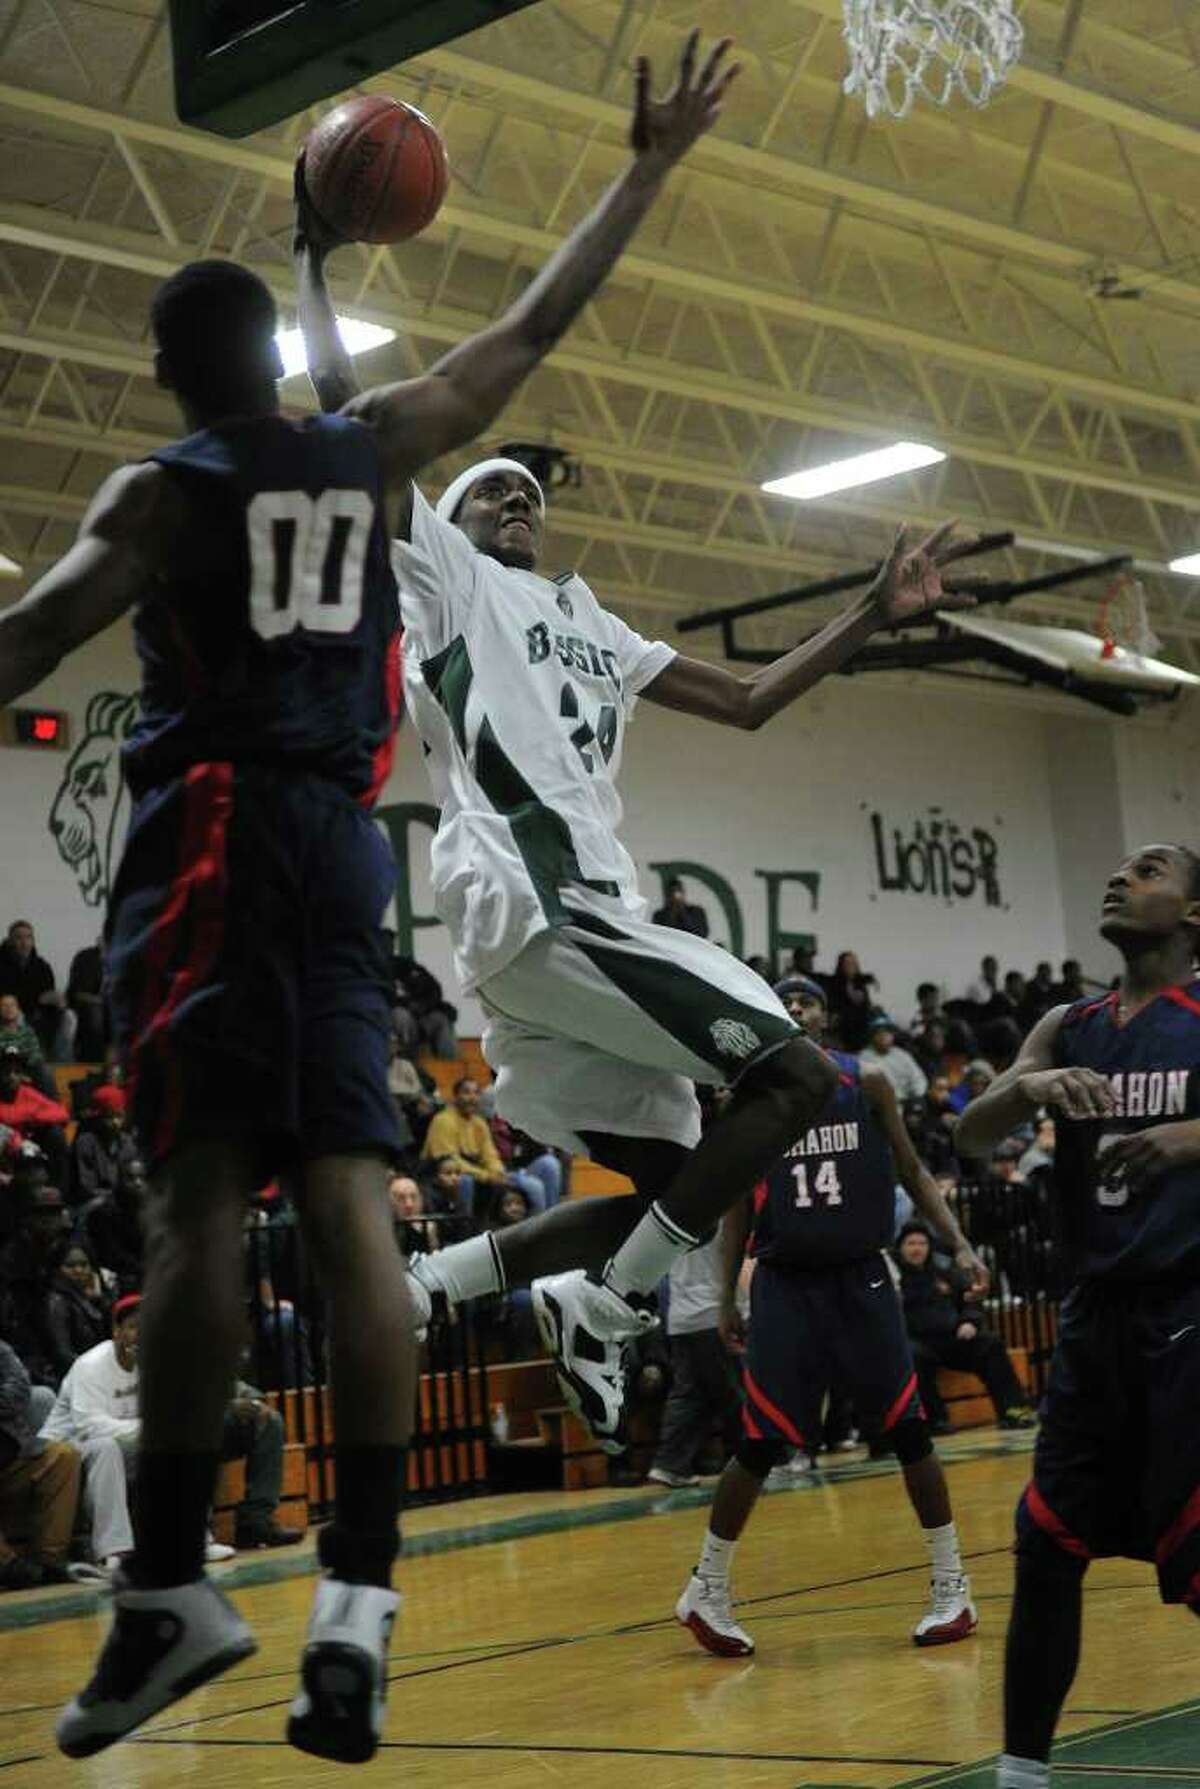 Bassick's Jamill Powell soars in for a basket against Brien McMahon defender Takari Smalls during their FCIAC matchup at Bassick High School in Bridgeport on Monday, January 24, 2011.